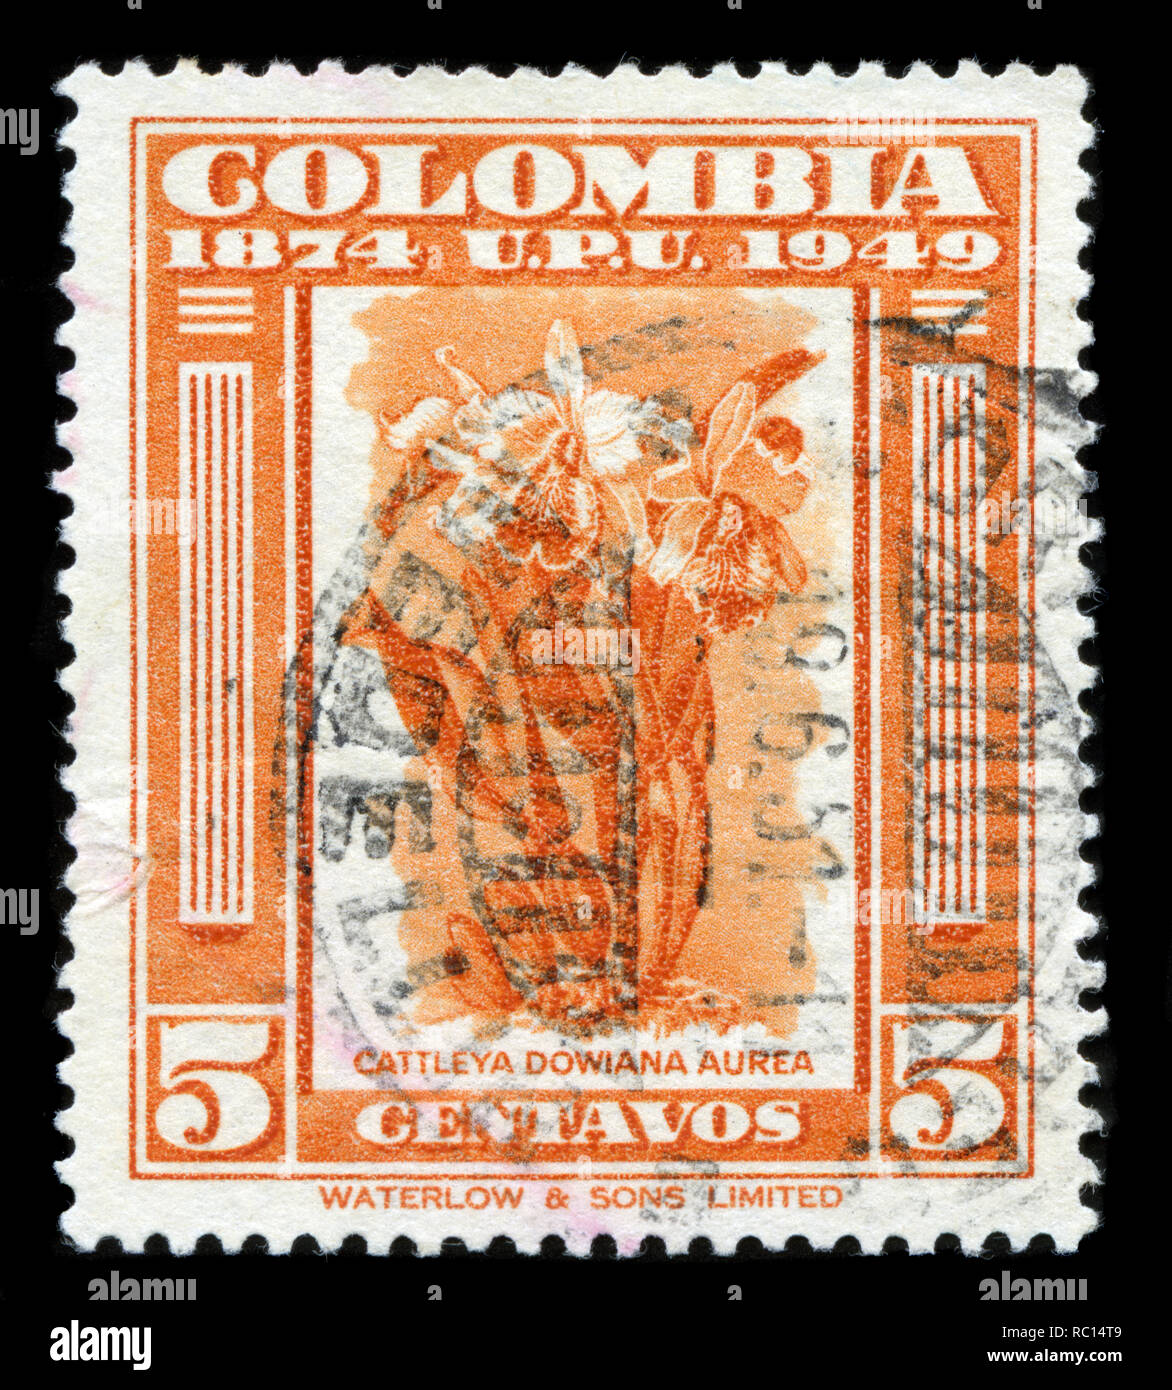 Postage stamp from Colombia in the U.P.U. (Universal Postal Union), 75th Anniversary series issued in 1950 Stock Photo